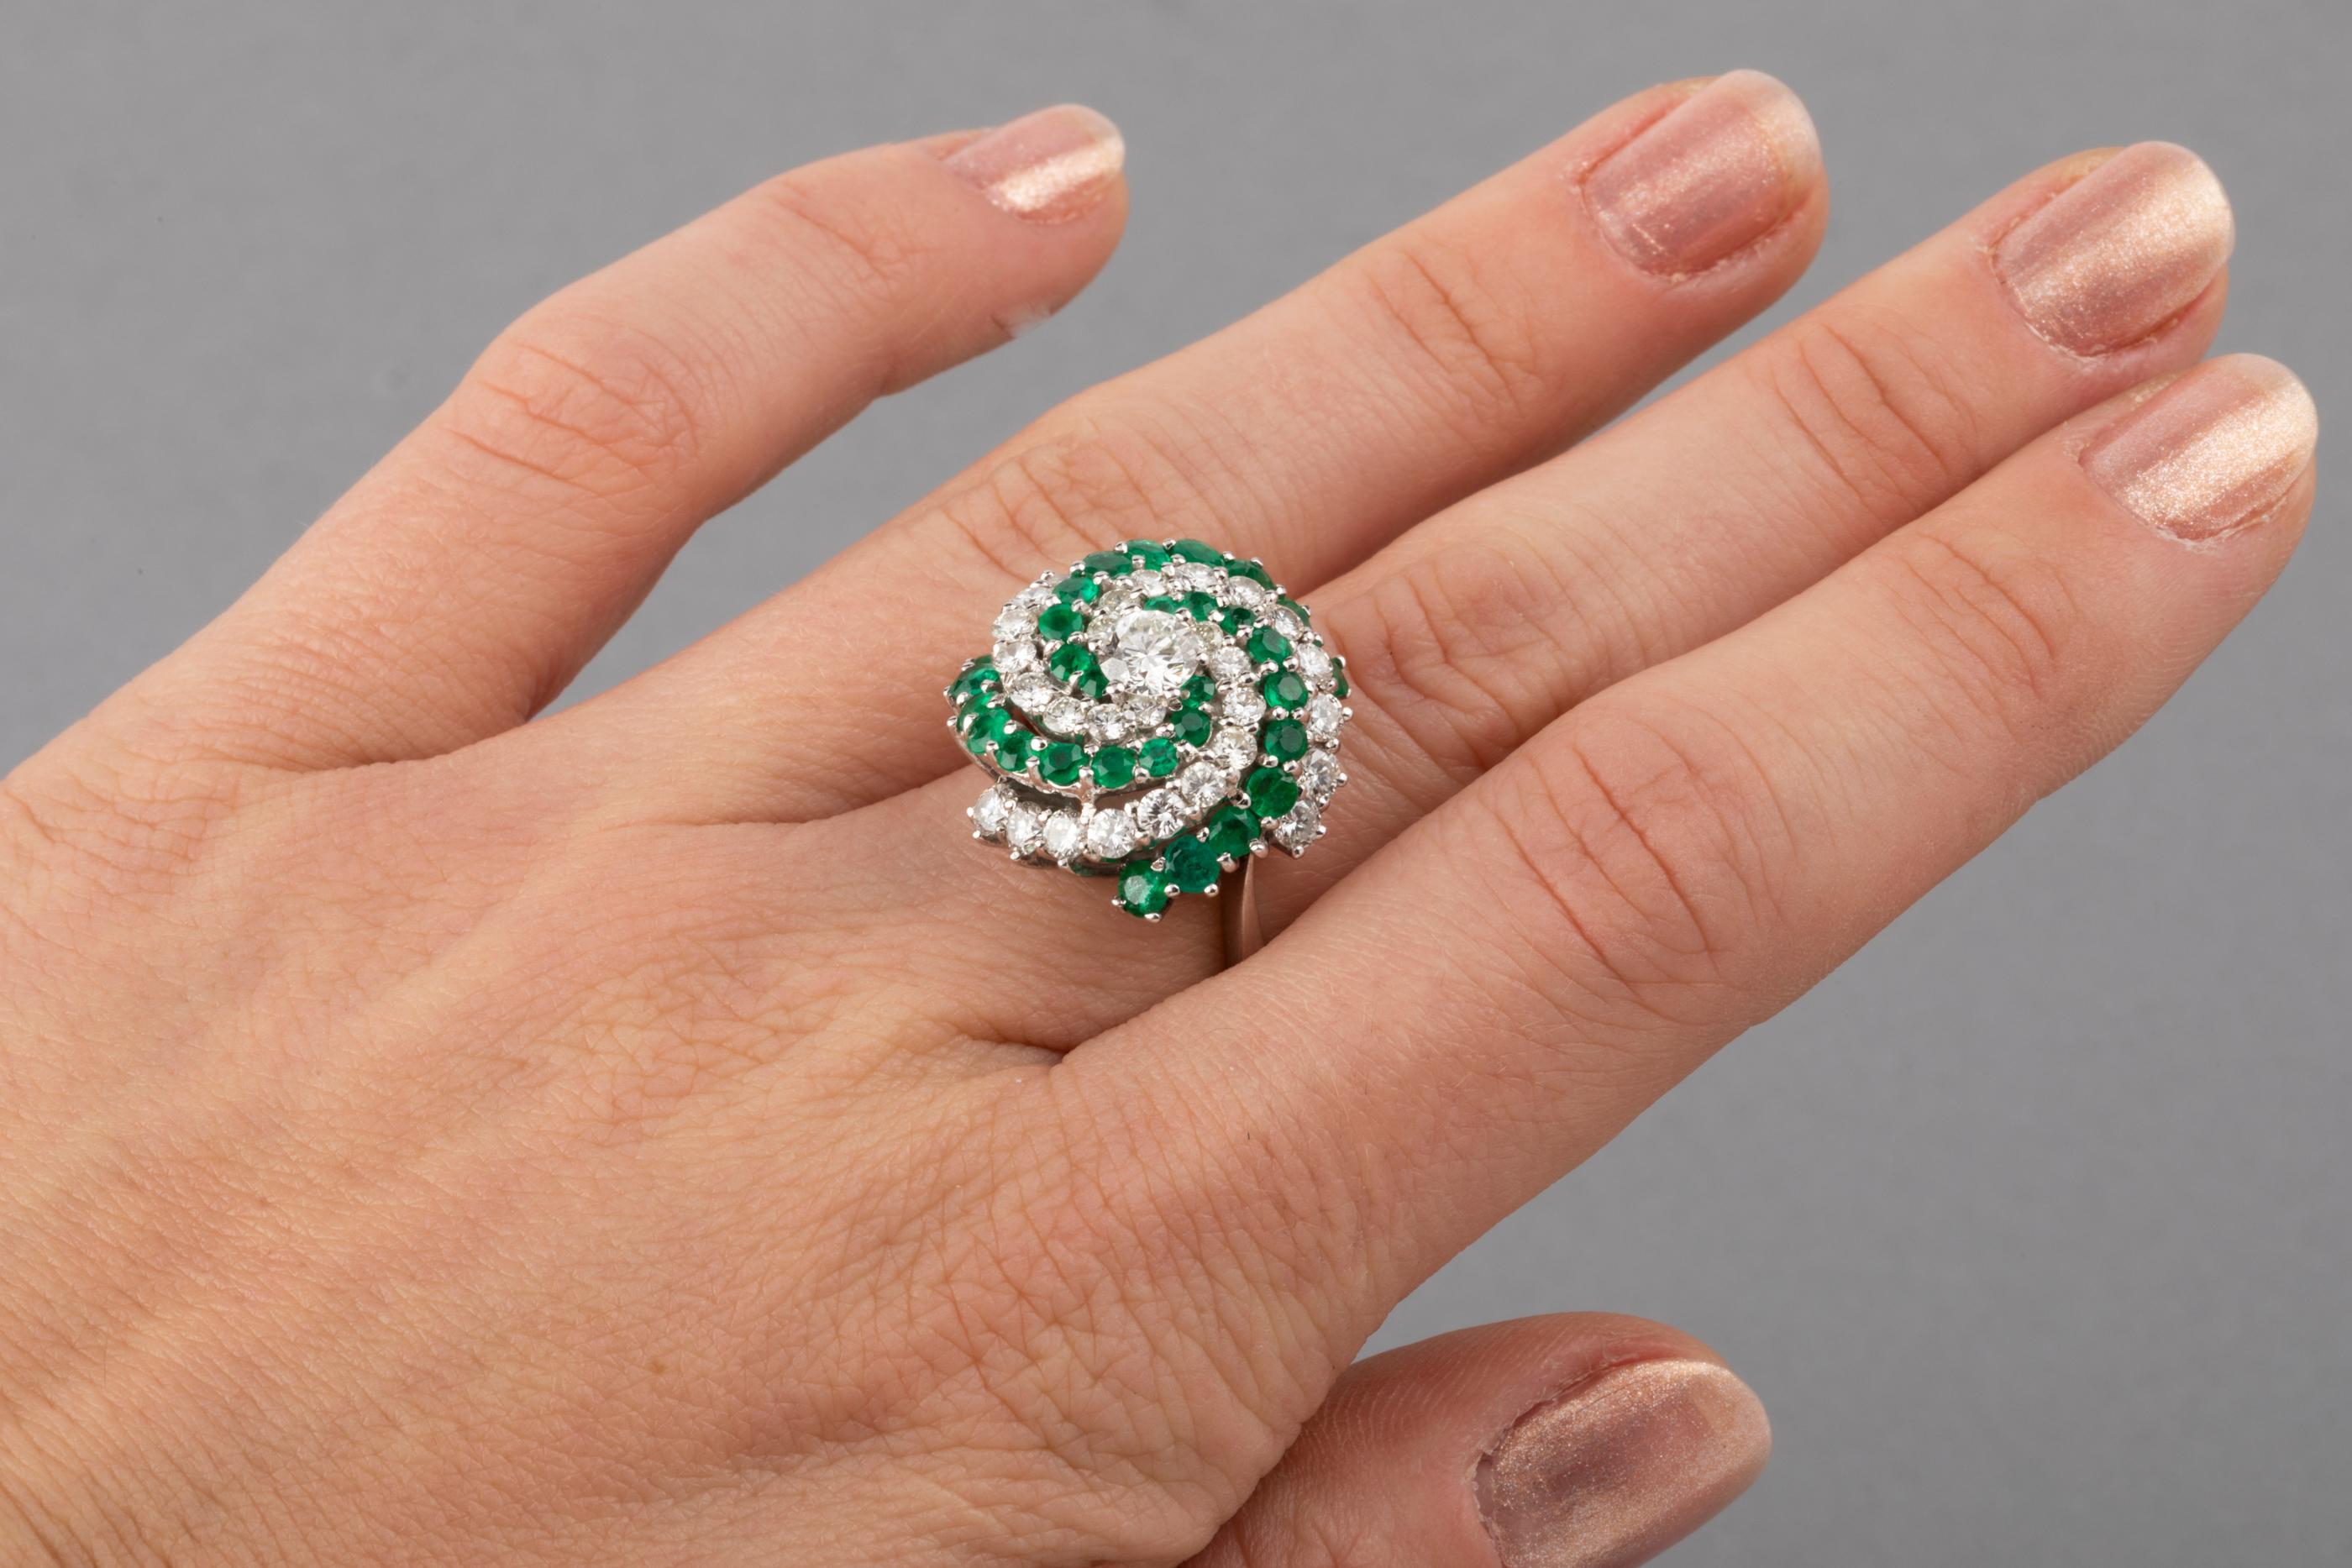 Women's 5 Carat Diamonds and 4 Carat Emeralds Ring and Earrings Set